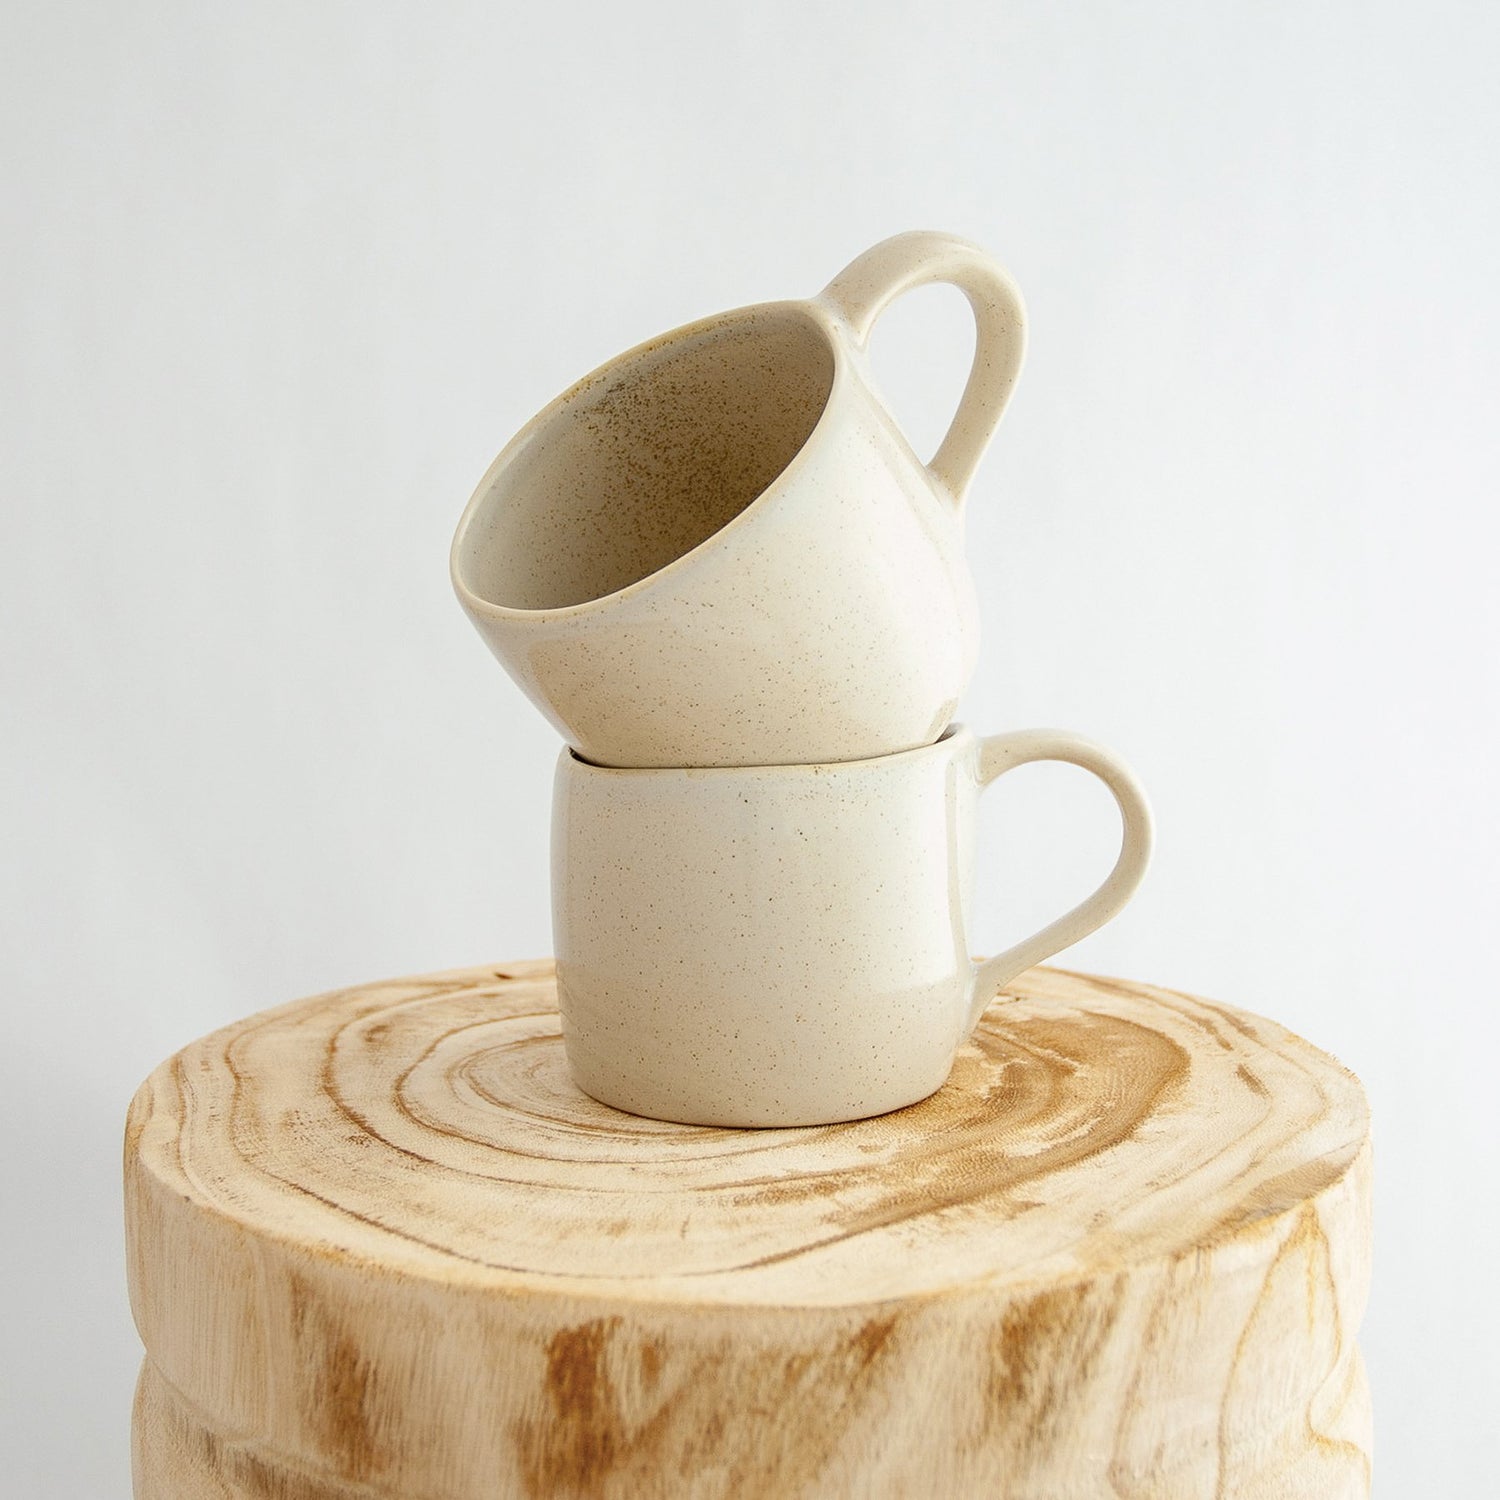 Two Robert Gordon oatmeal cream organic mugs stacked on a natural wooden round side table